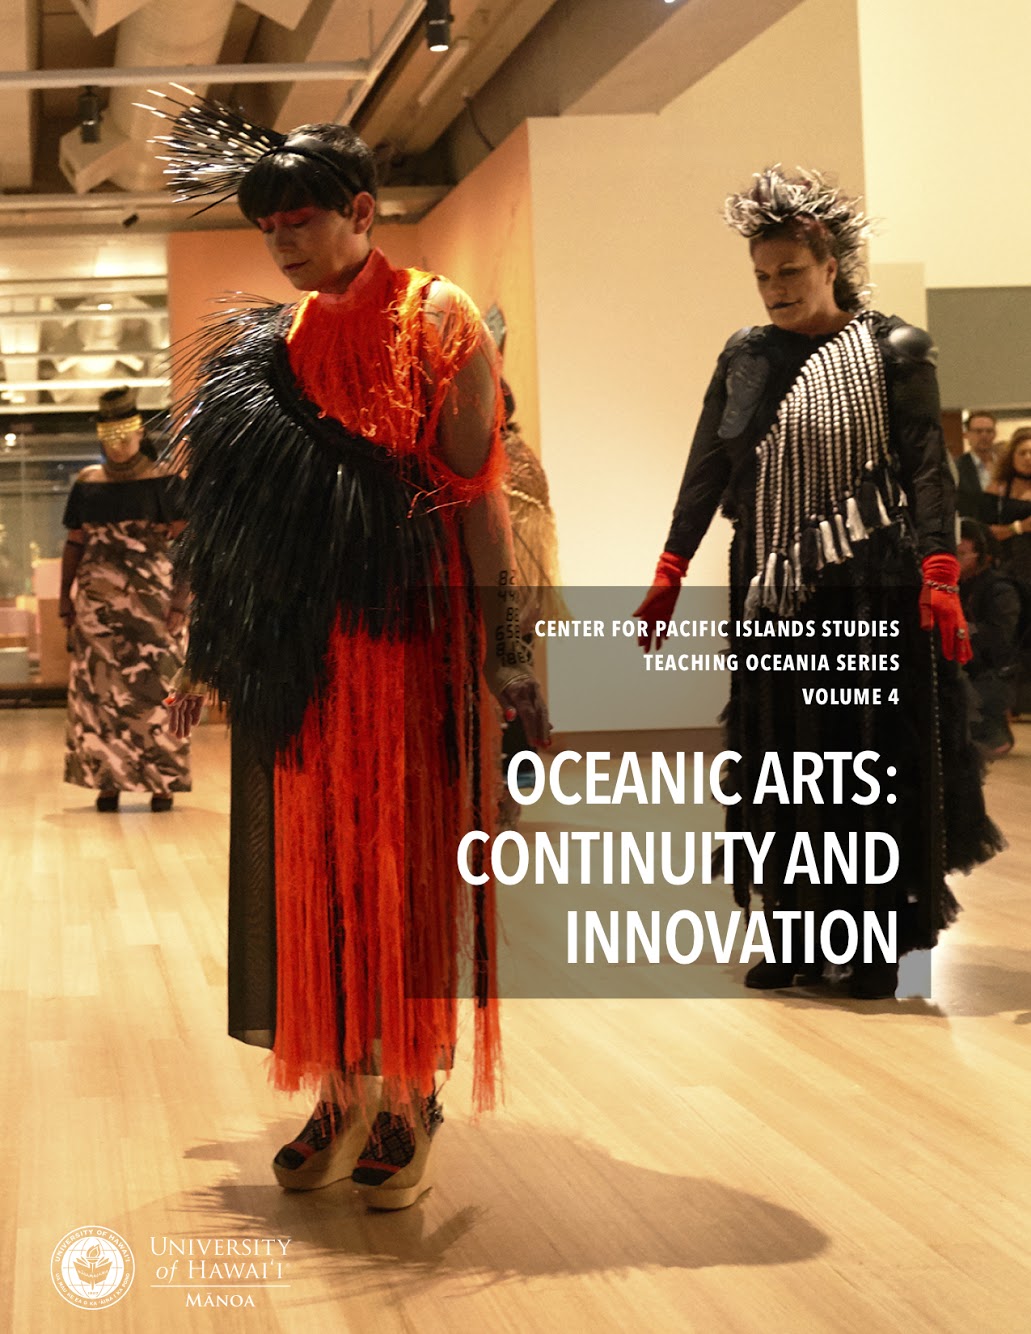 Oceanic Arts: Continuity and Innovation